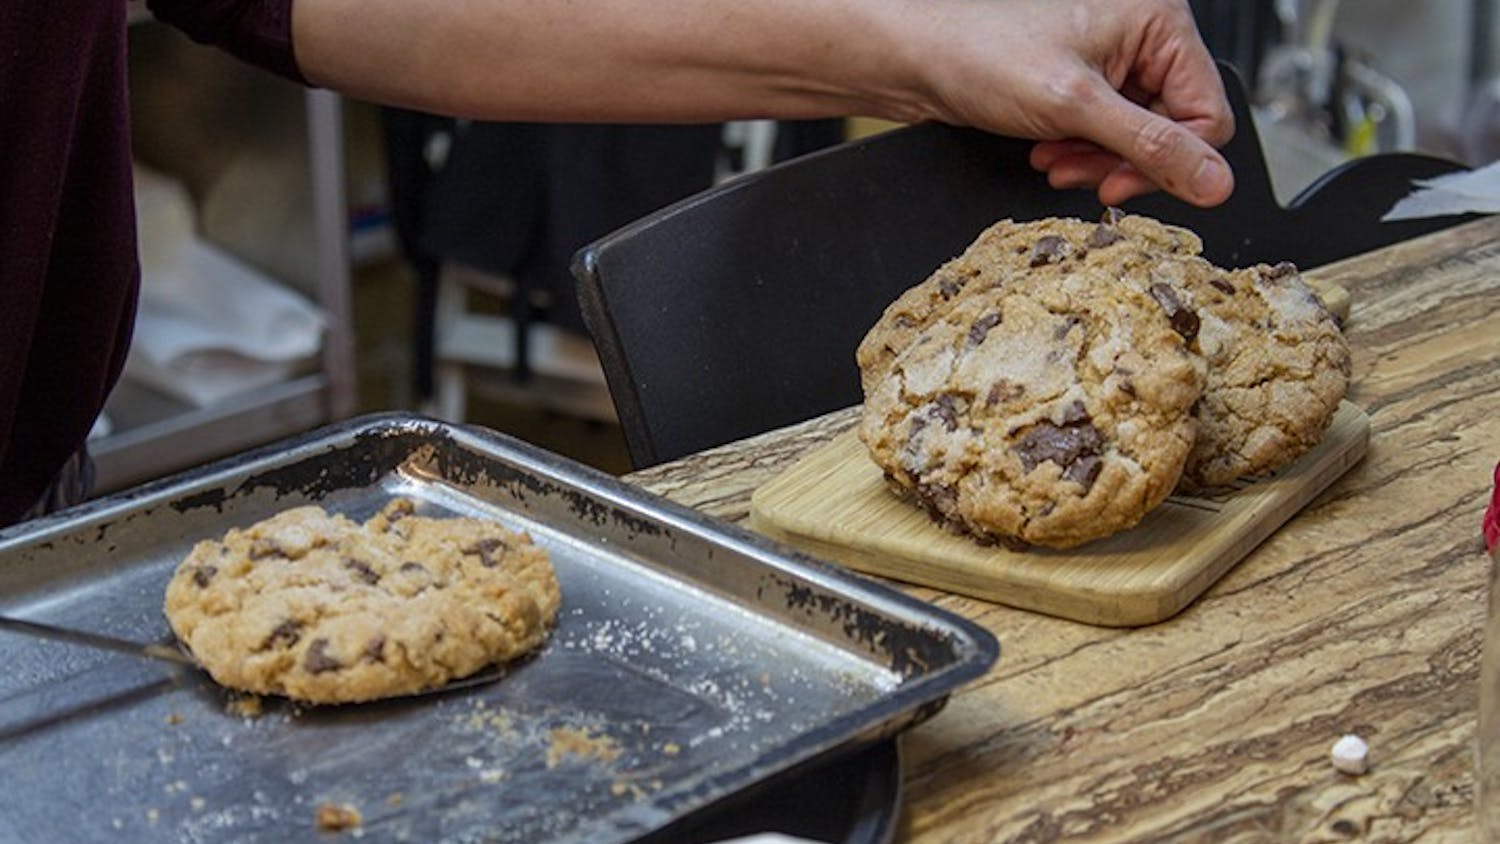 The Local Buzz owner Stephanie Bridgers prepares freshly baked, gluten-free lavender chocolate chip cookies to be sold. The Local Buzz is located on Harden Street in Five Points.